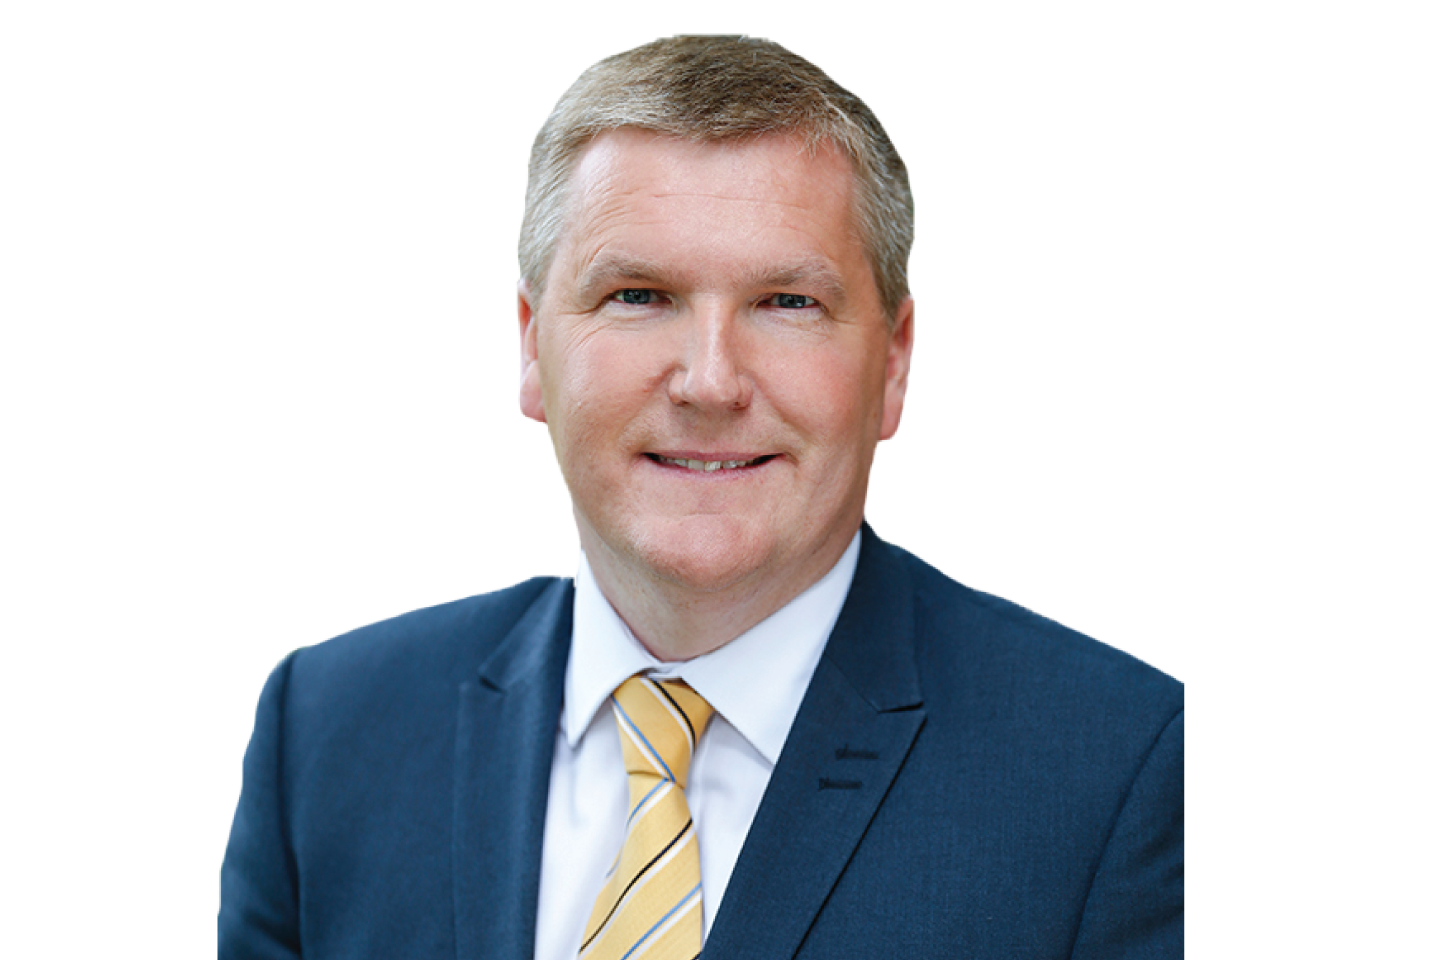 State bill for personal injury claims up 232% since 2010 – McGrath